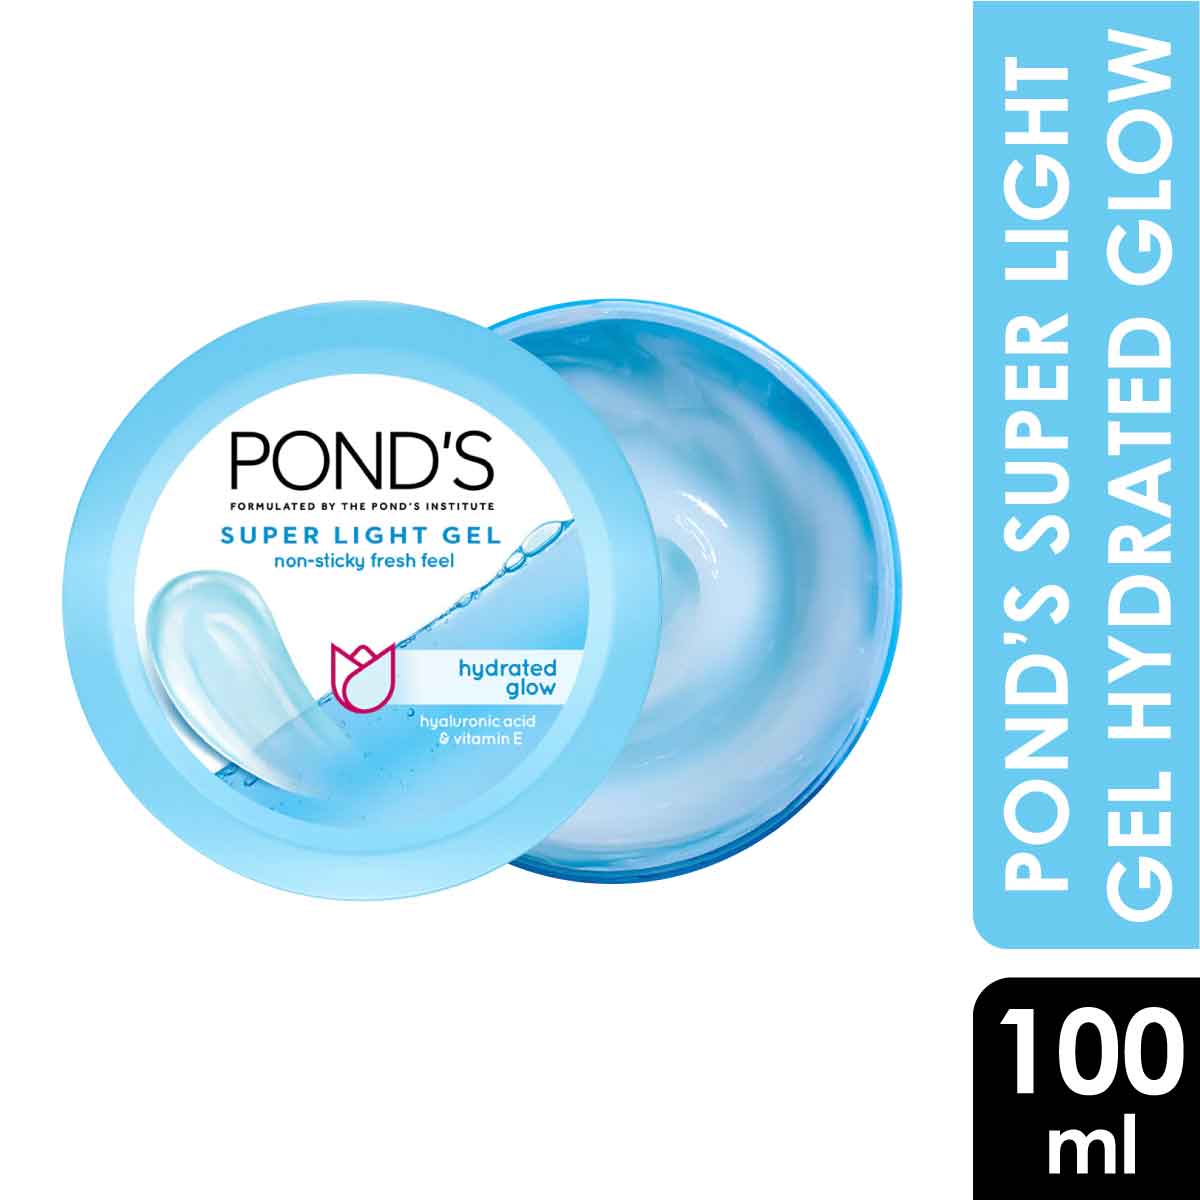 POND’S Super Light Gel 100ml Hydrated Glow With Hyaluronic Acid & Vitamin E